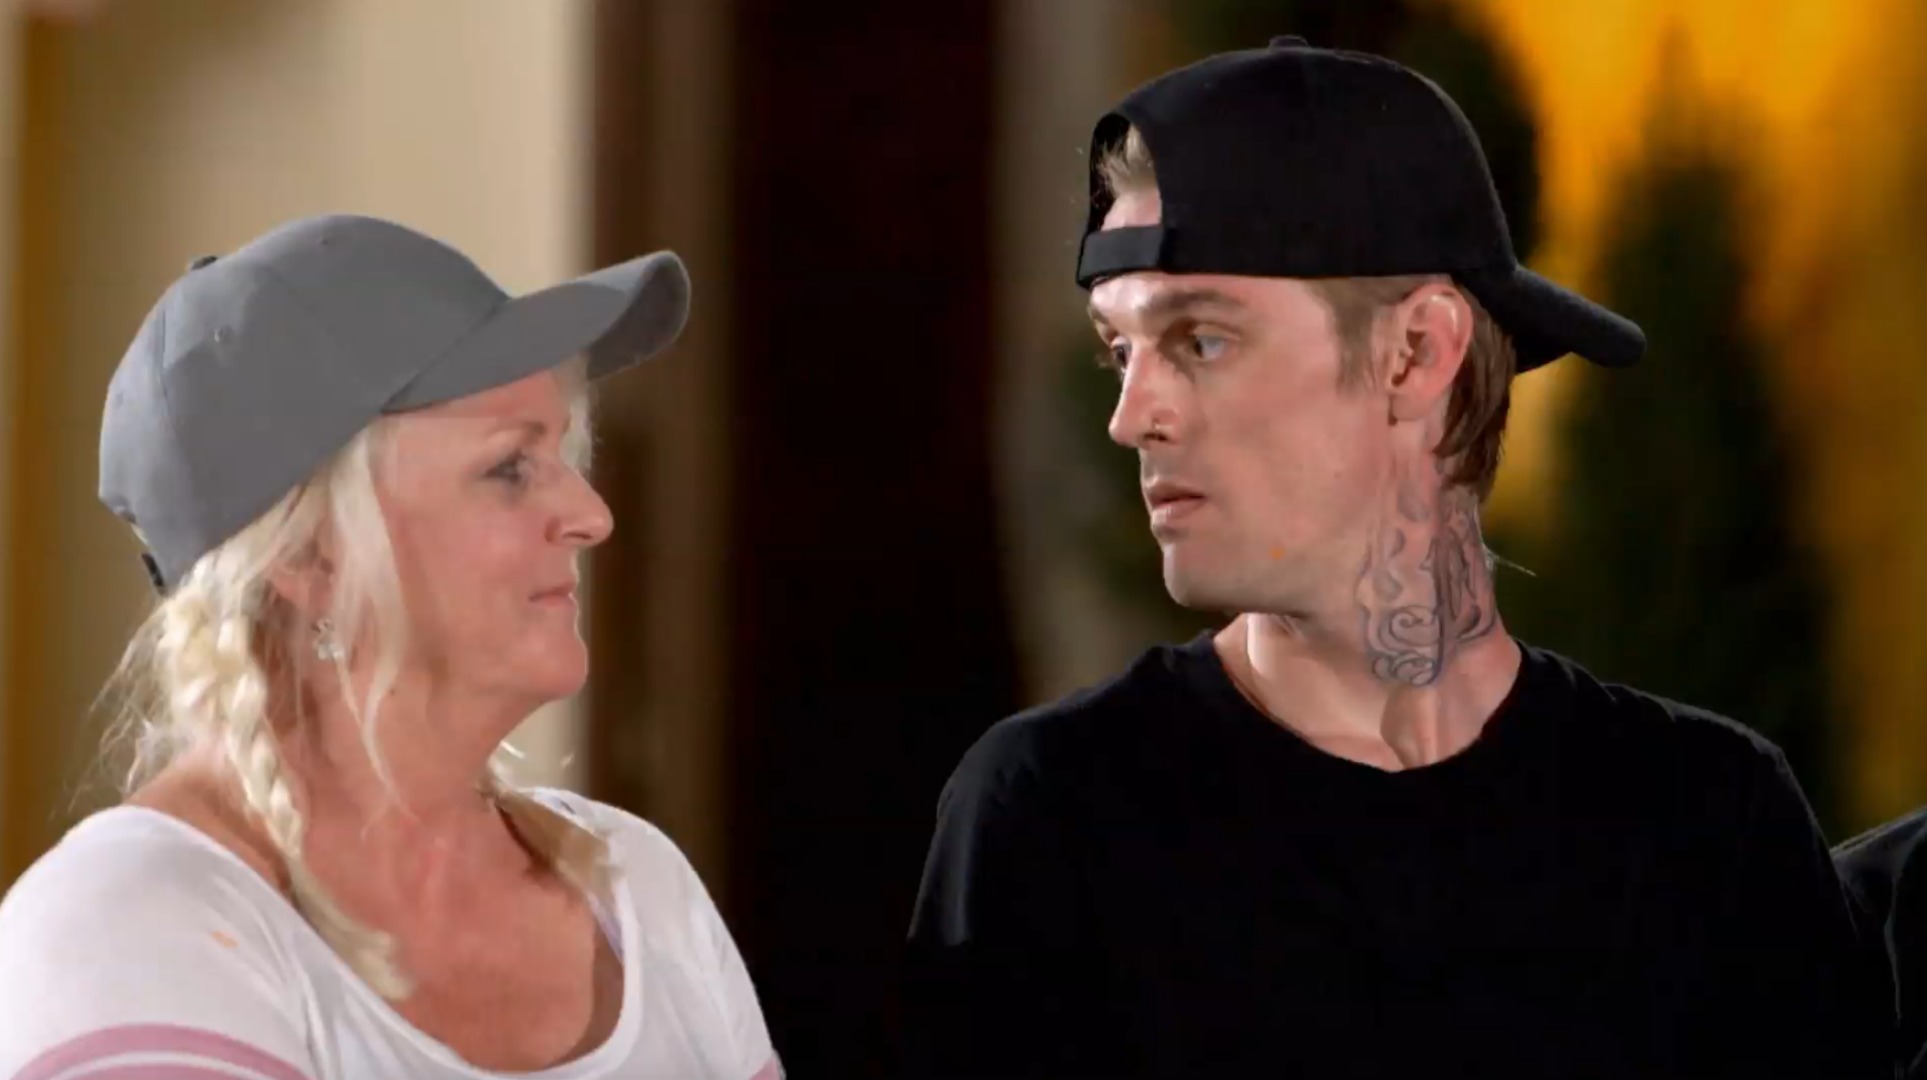 Watch Sneak Peek: Aaron & Jane Confront Their Lies! | Marriage Boot Camp: Reality Stars Family Edition Video Extras